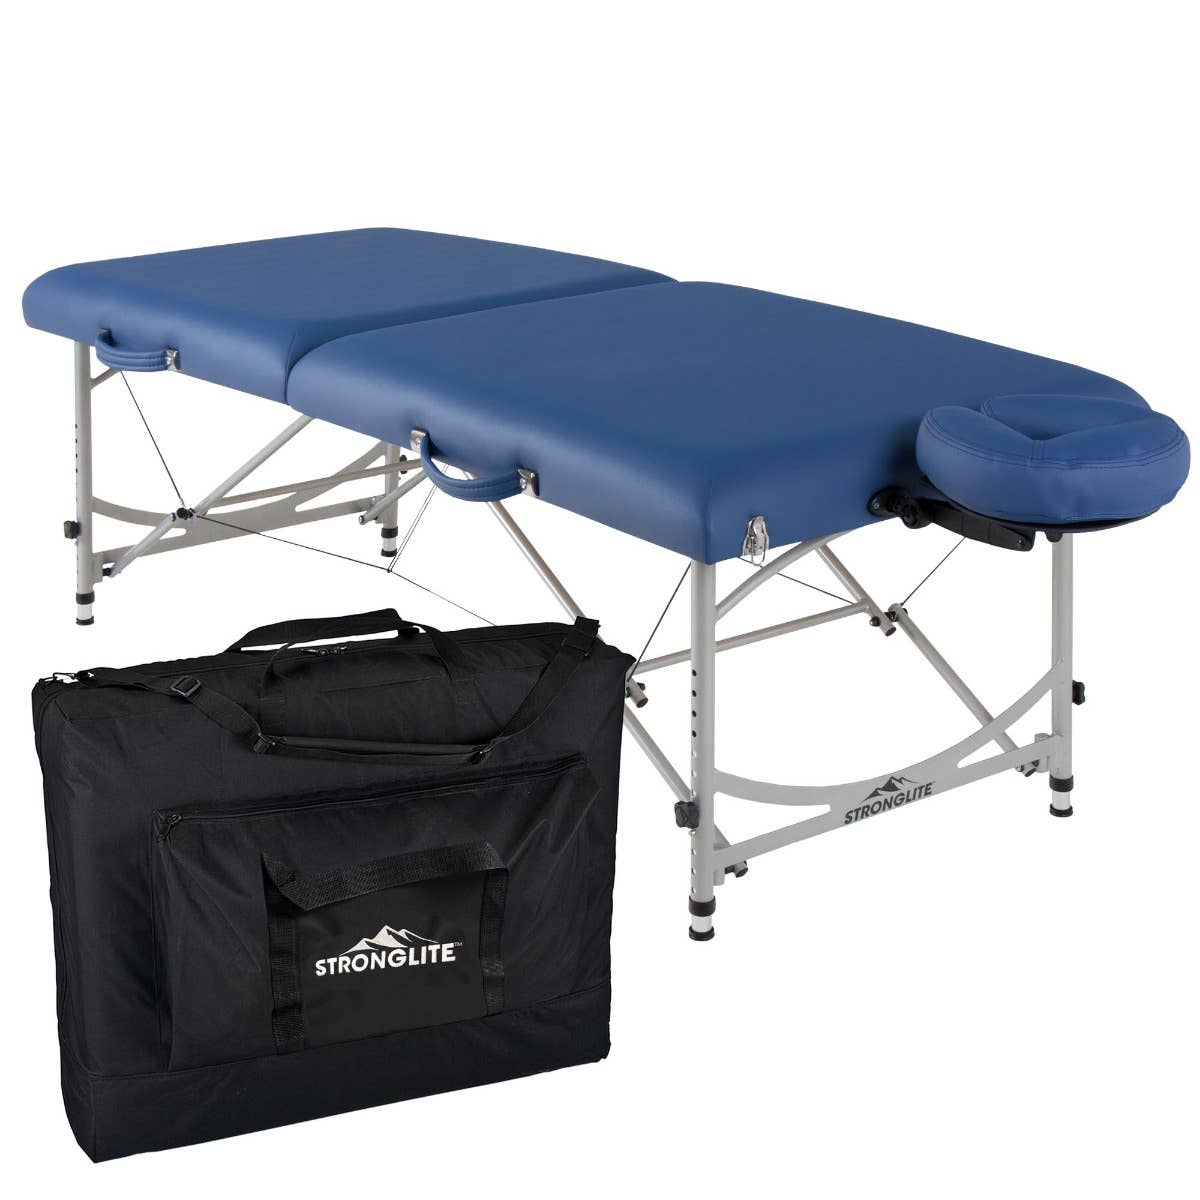 Versalite Pro aluminum light weight portable massage table by Stronglite, in Royal Blue color